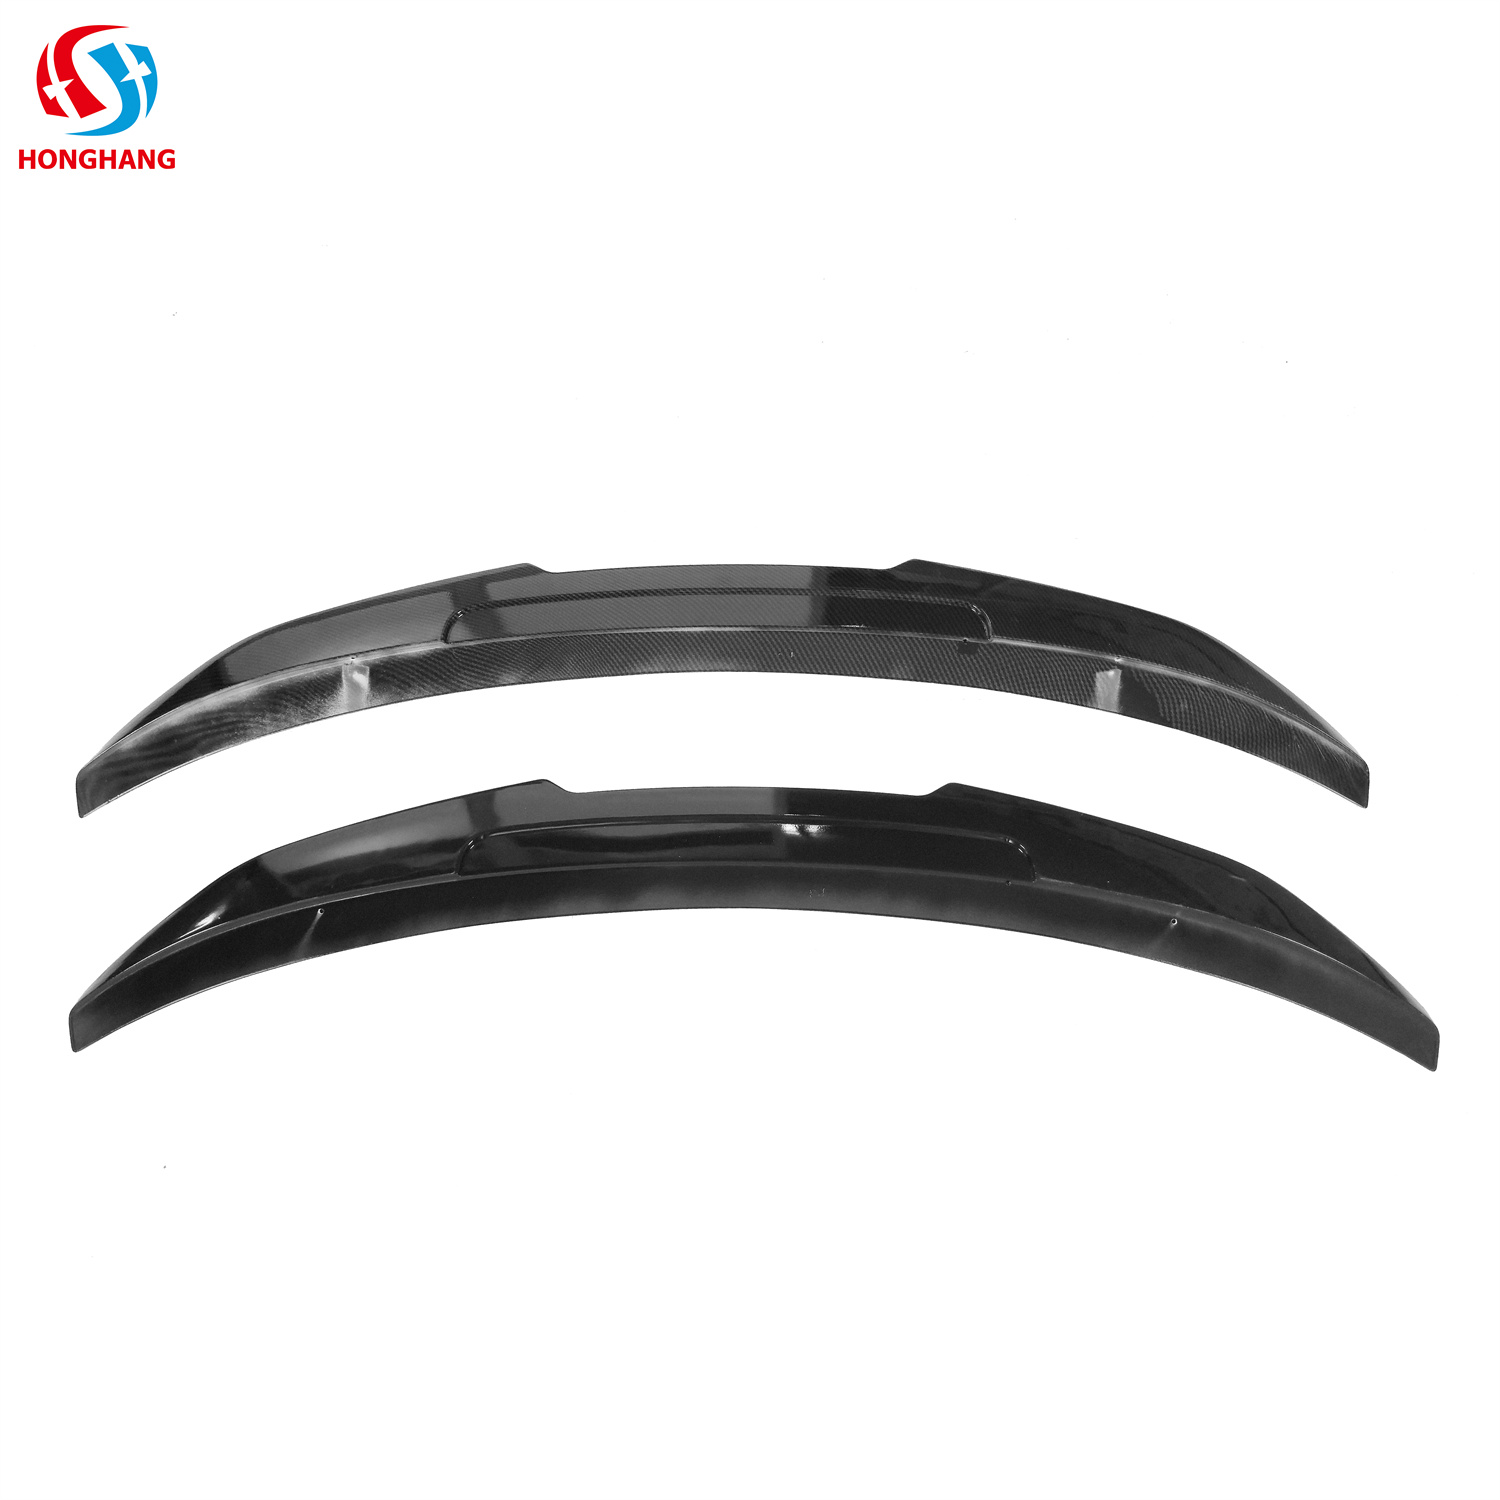  Bmw 3 Series G20 Rear Spoiler 2020+ Mp/Psm Style